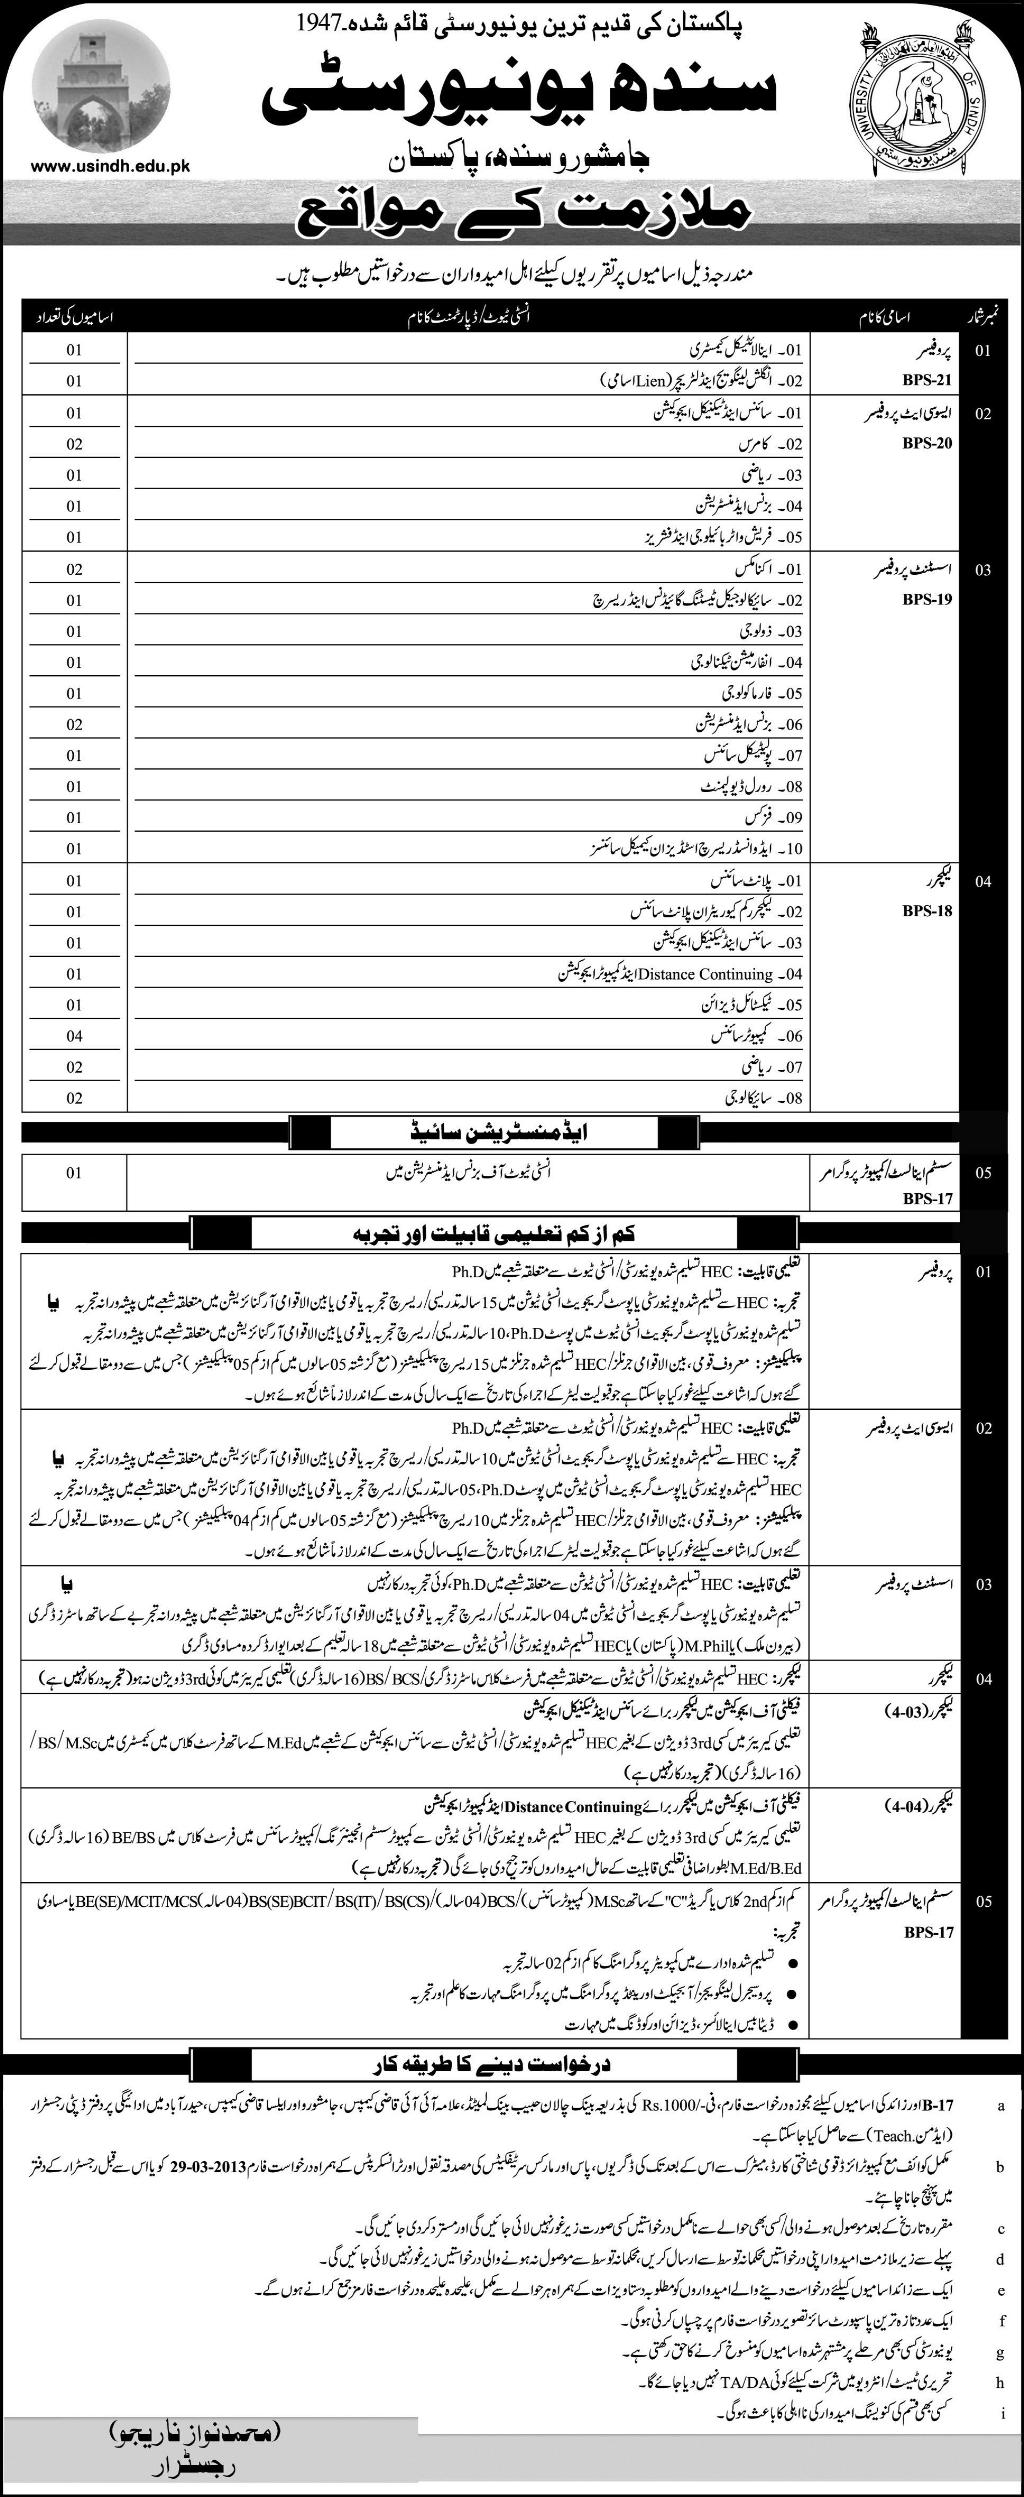 Sindh University Jobs 2013 Jamshoro Latest for Faculty Associate/Assistant/Professors/Lecturers